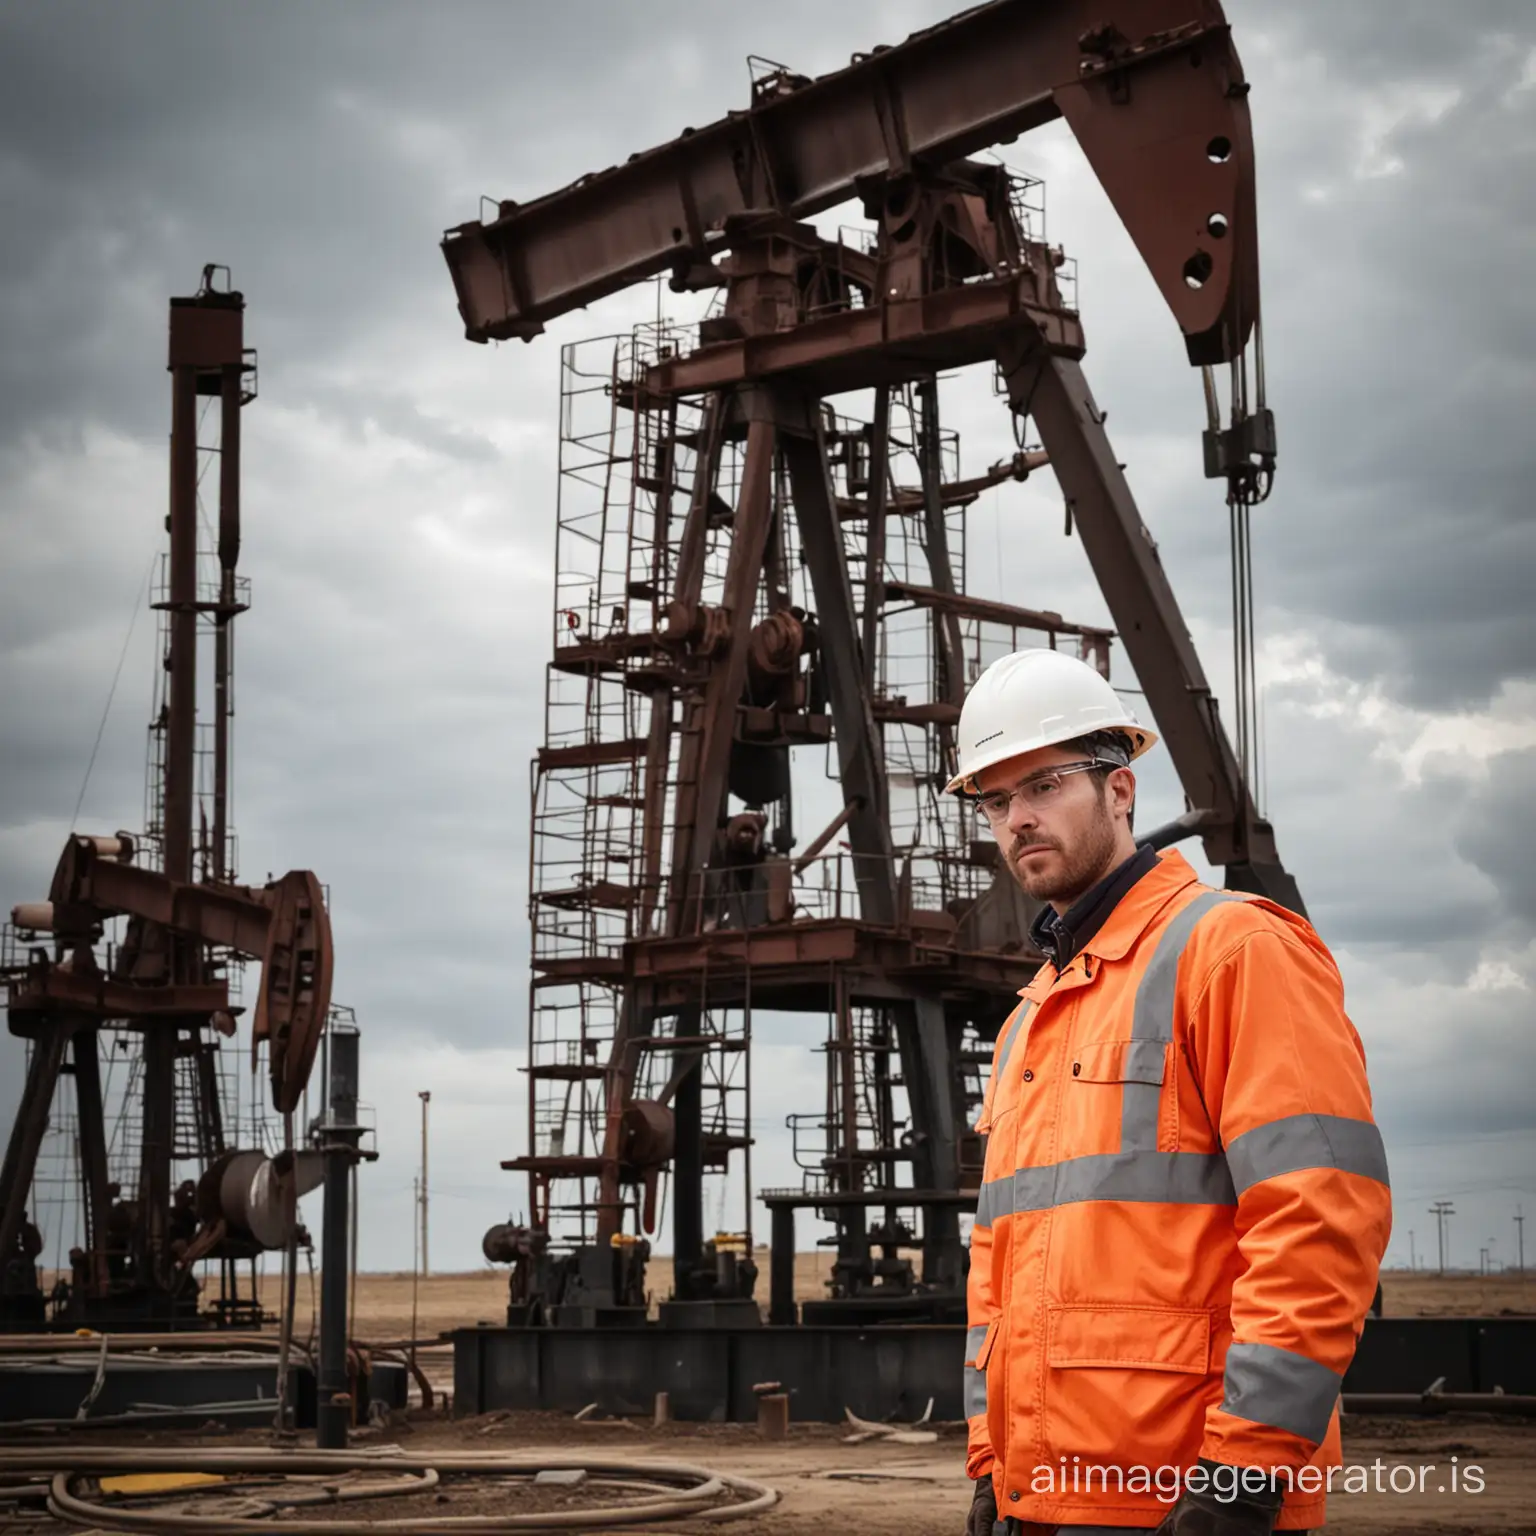 Oilwell-Engineer-Working-on-Drilling-Rig-Platform